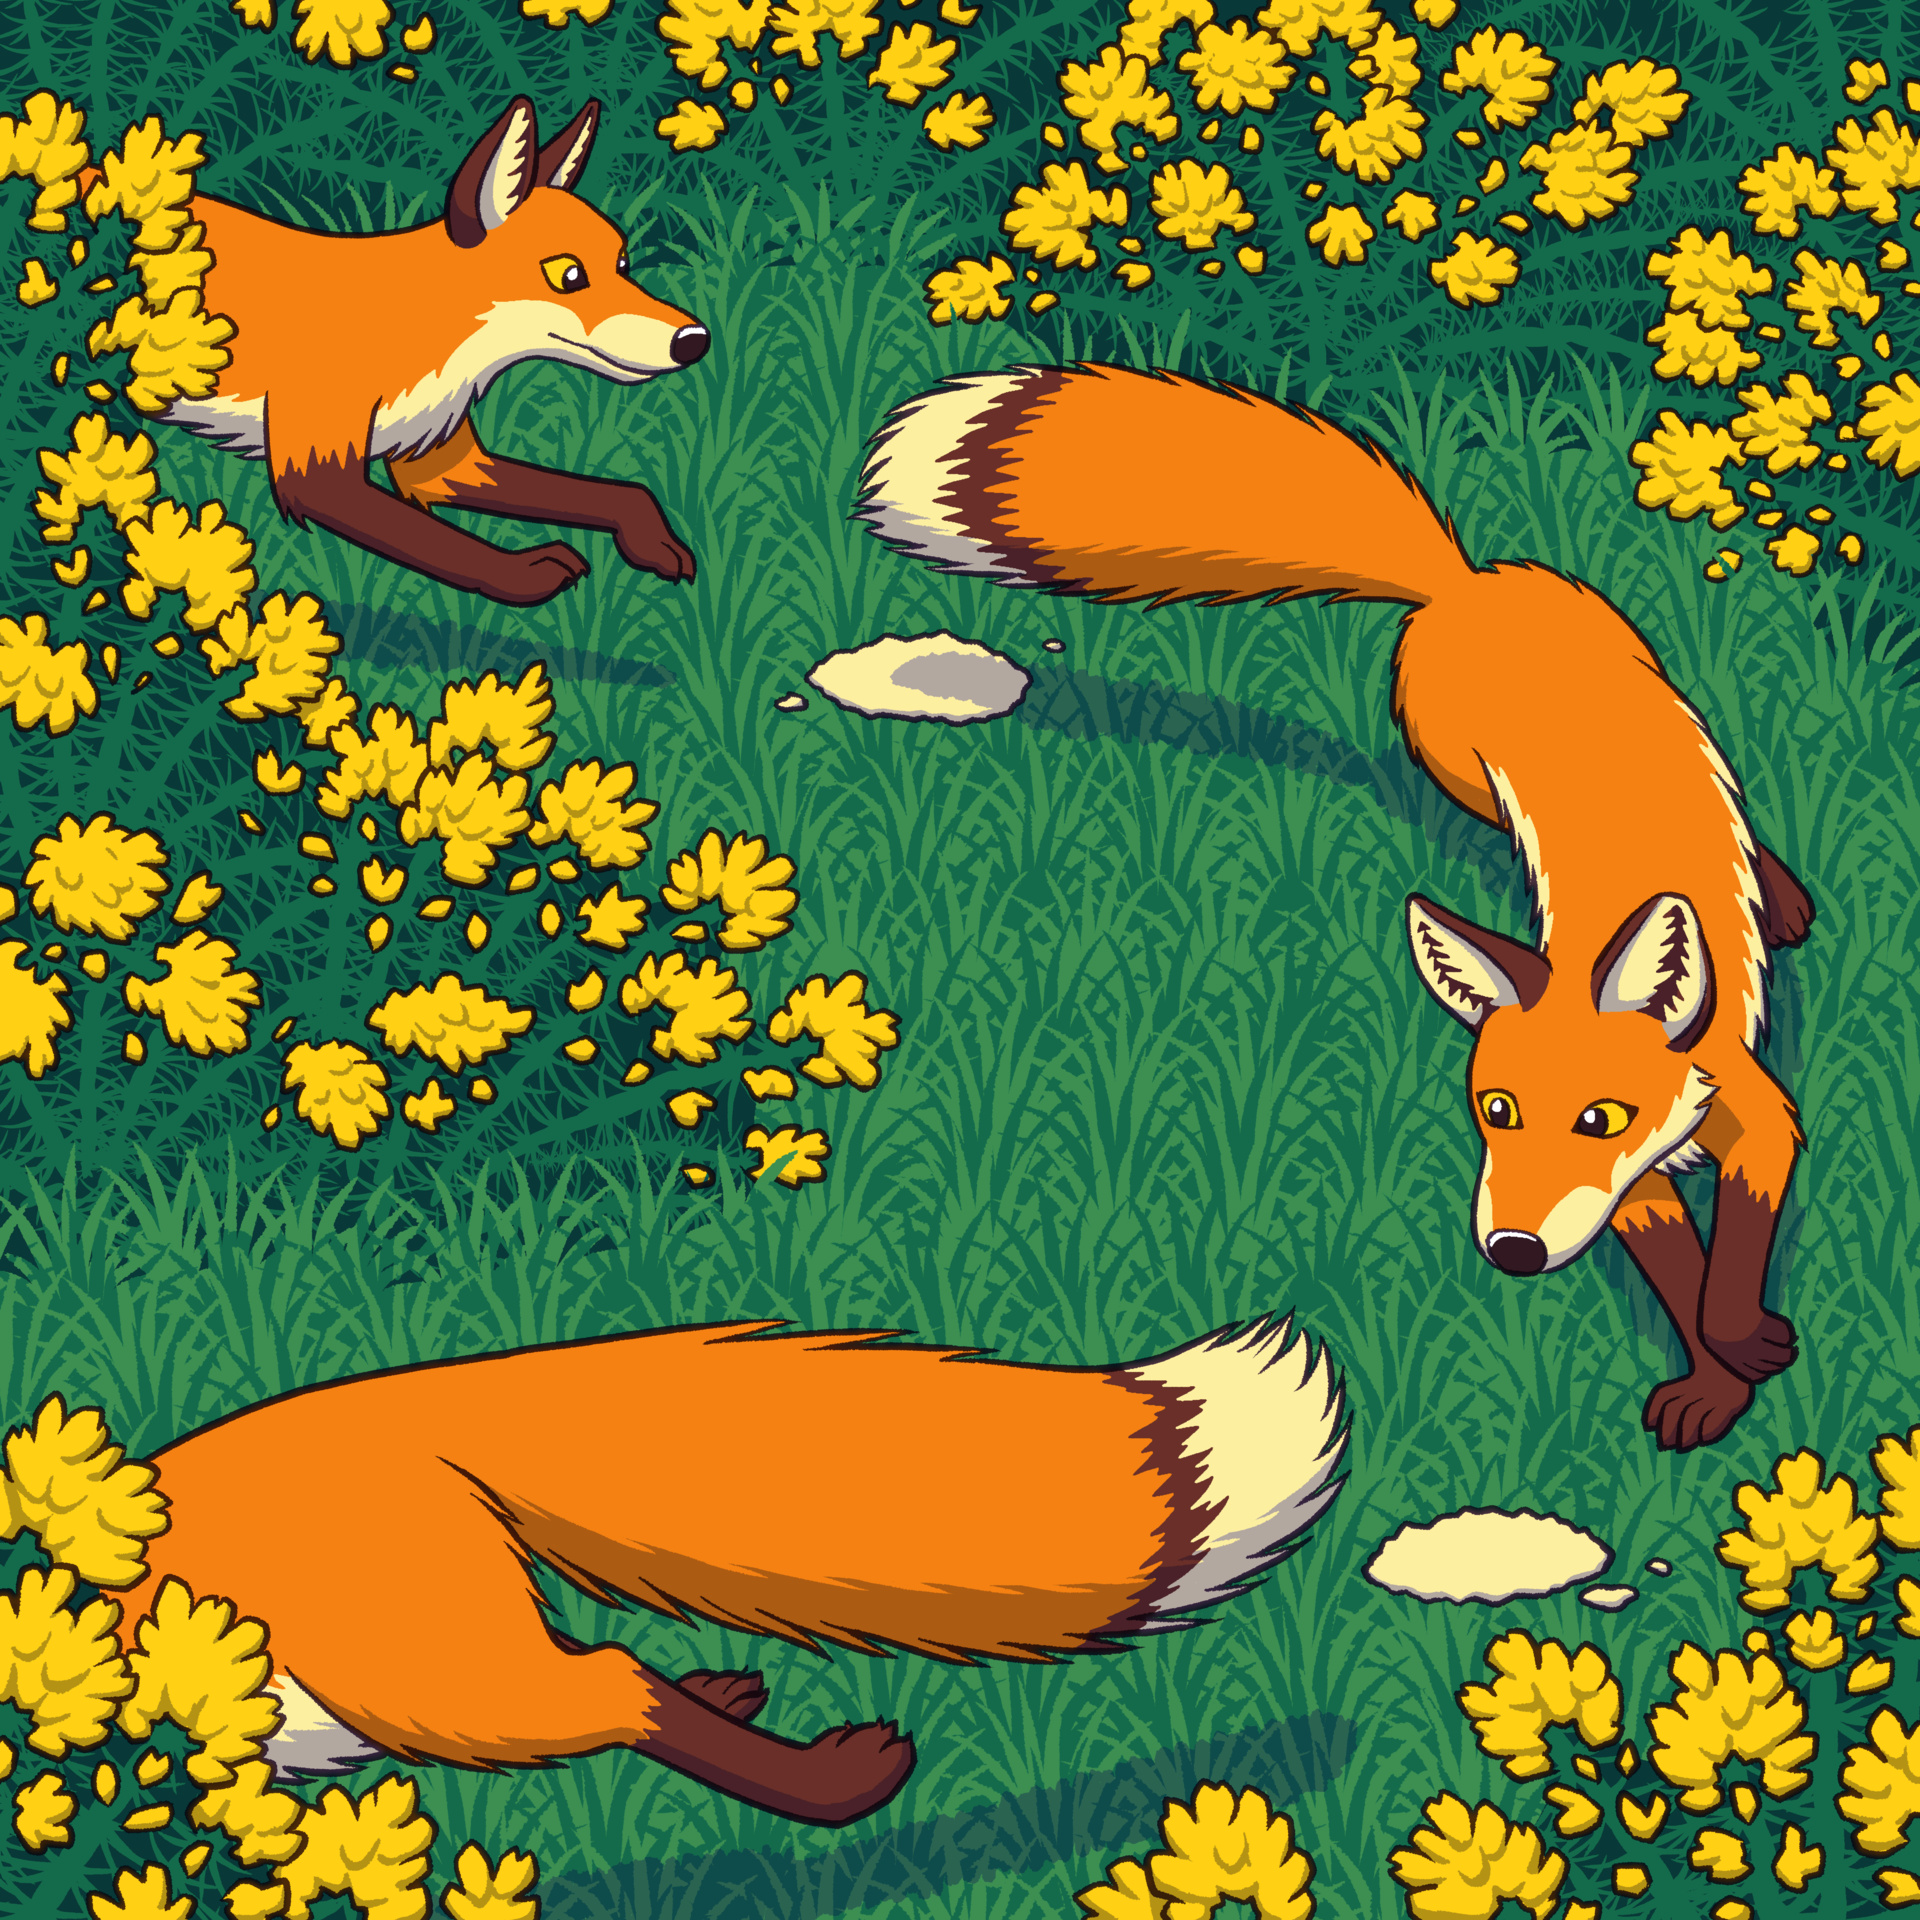 several foxes run between flowering gorse bushes, following a trail of flour patches